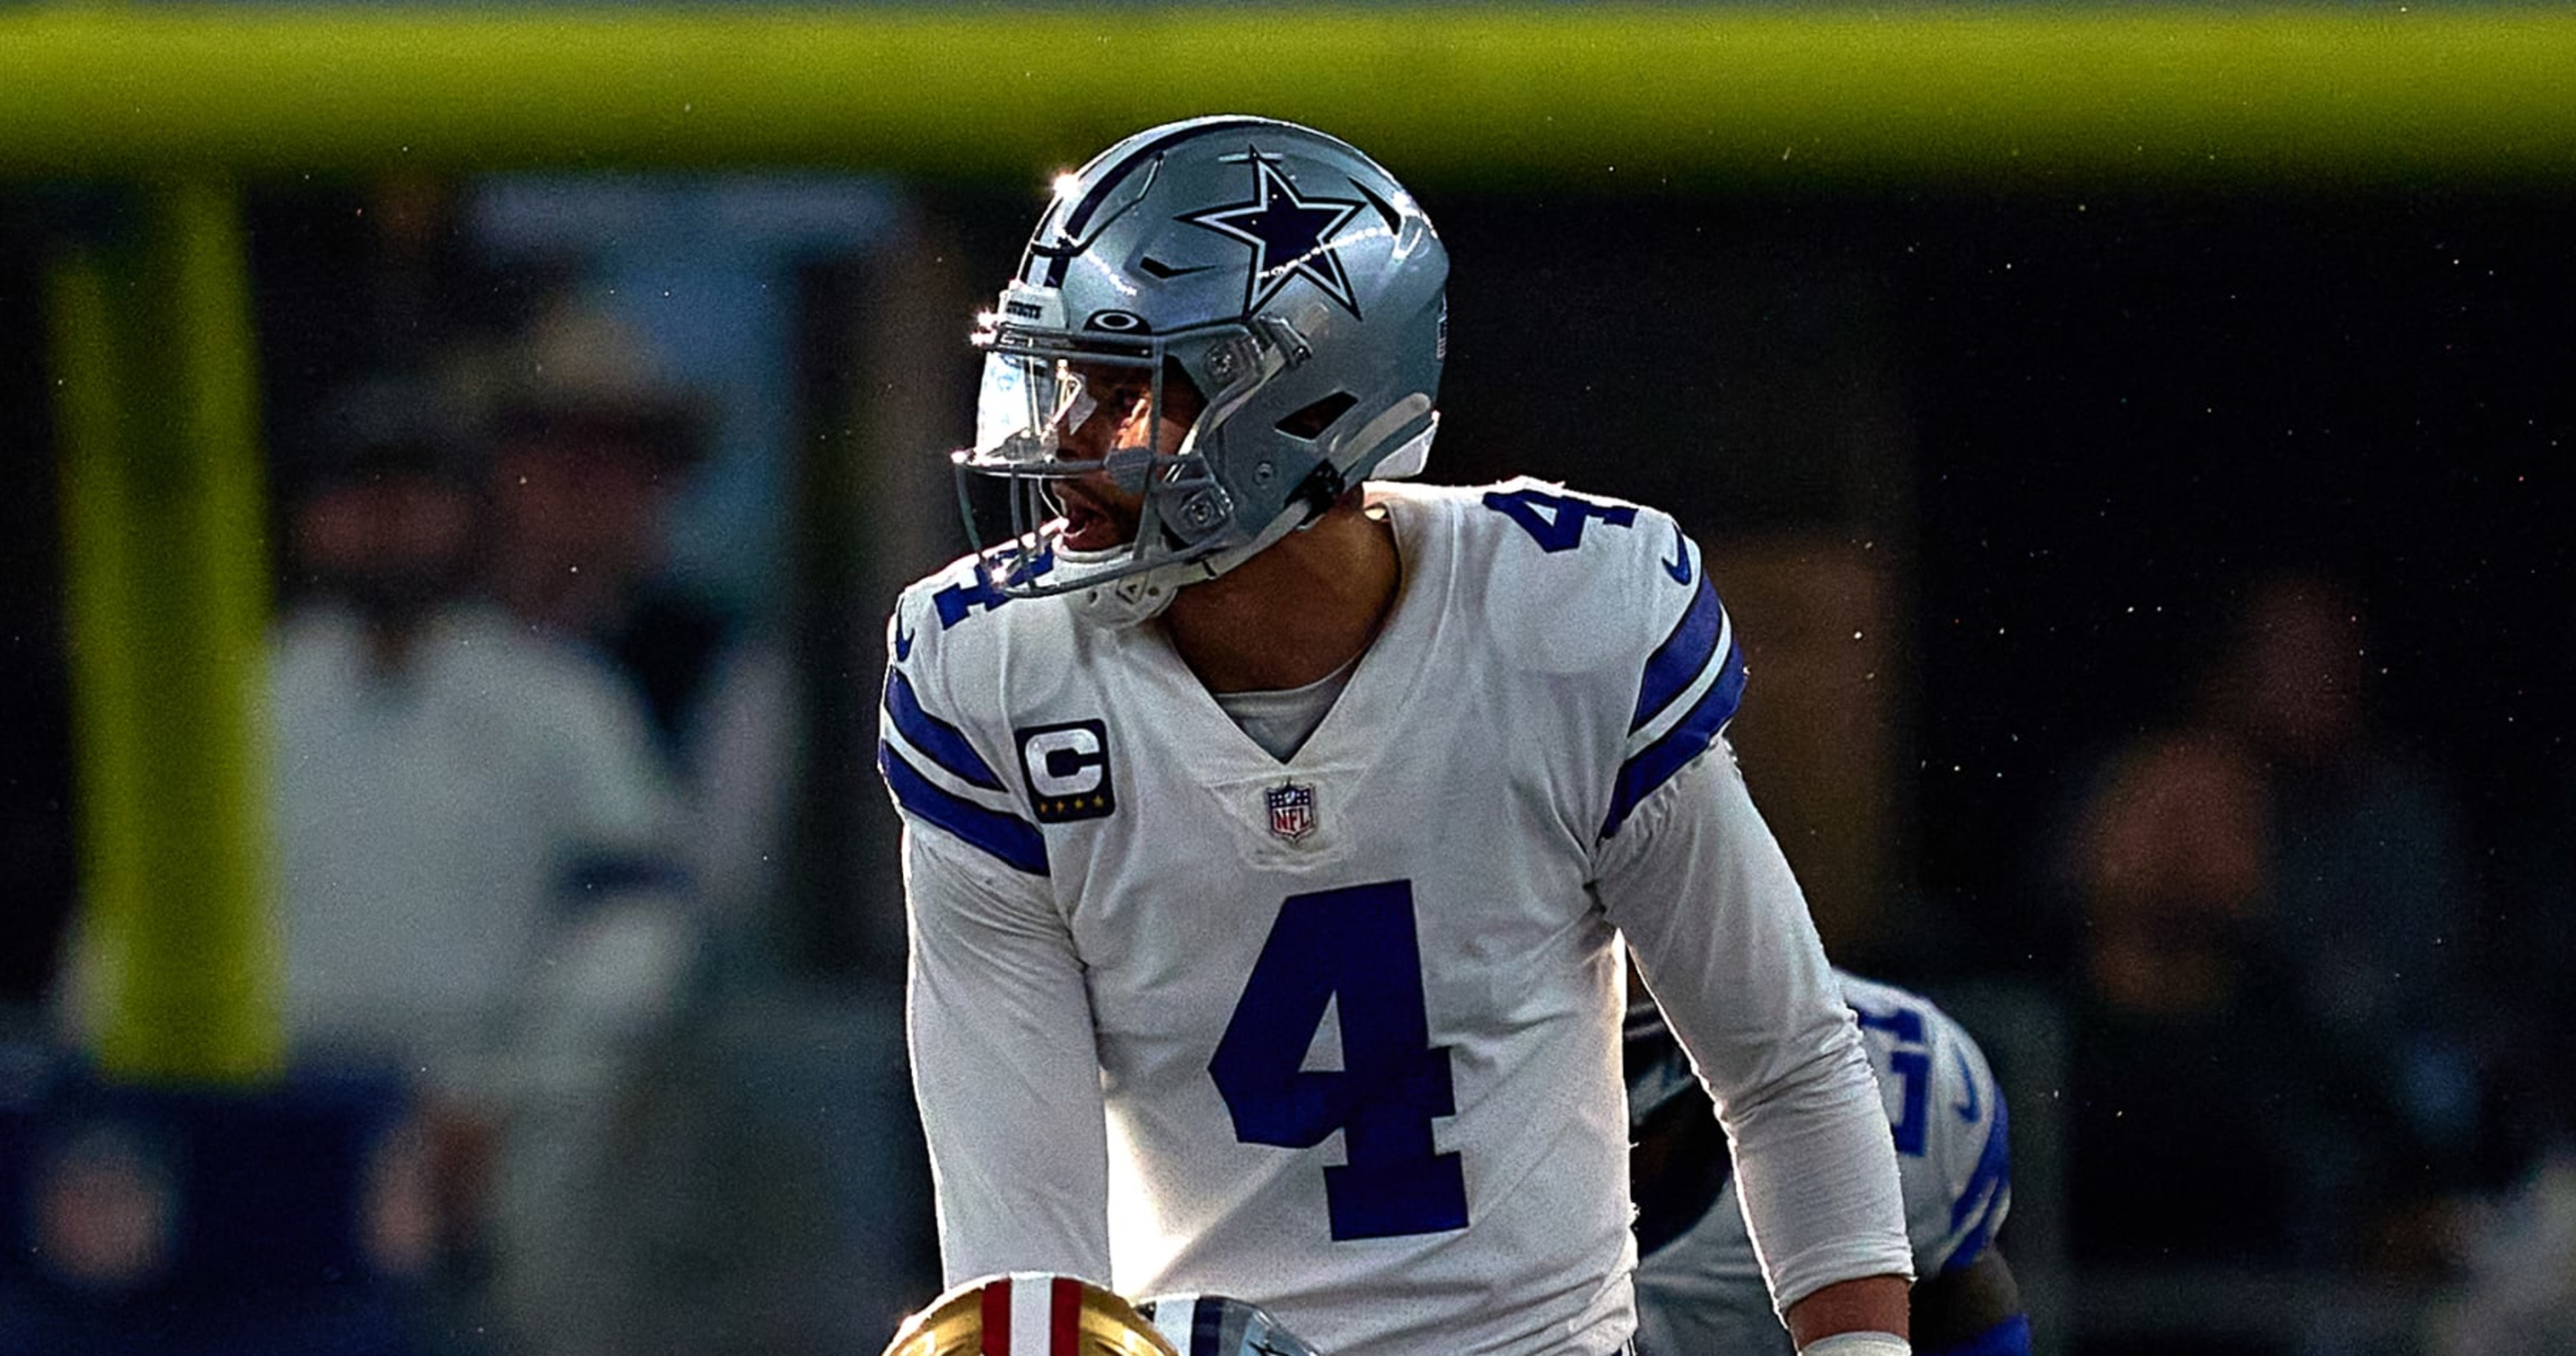 2022 Schedule: Cowboys to open vs Buccaneers for 2nd-straight year